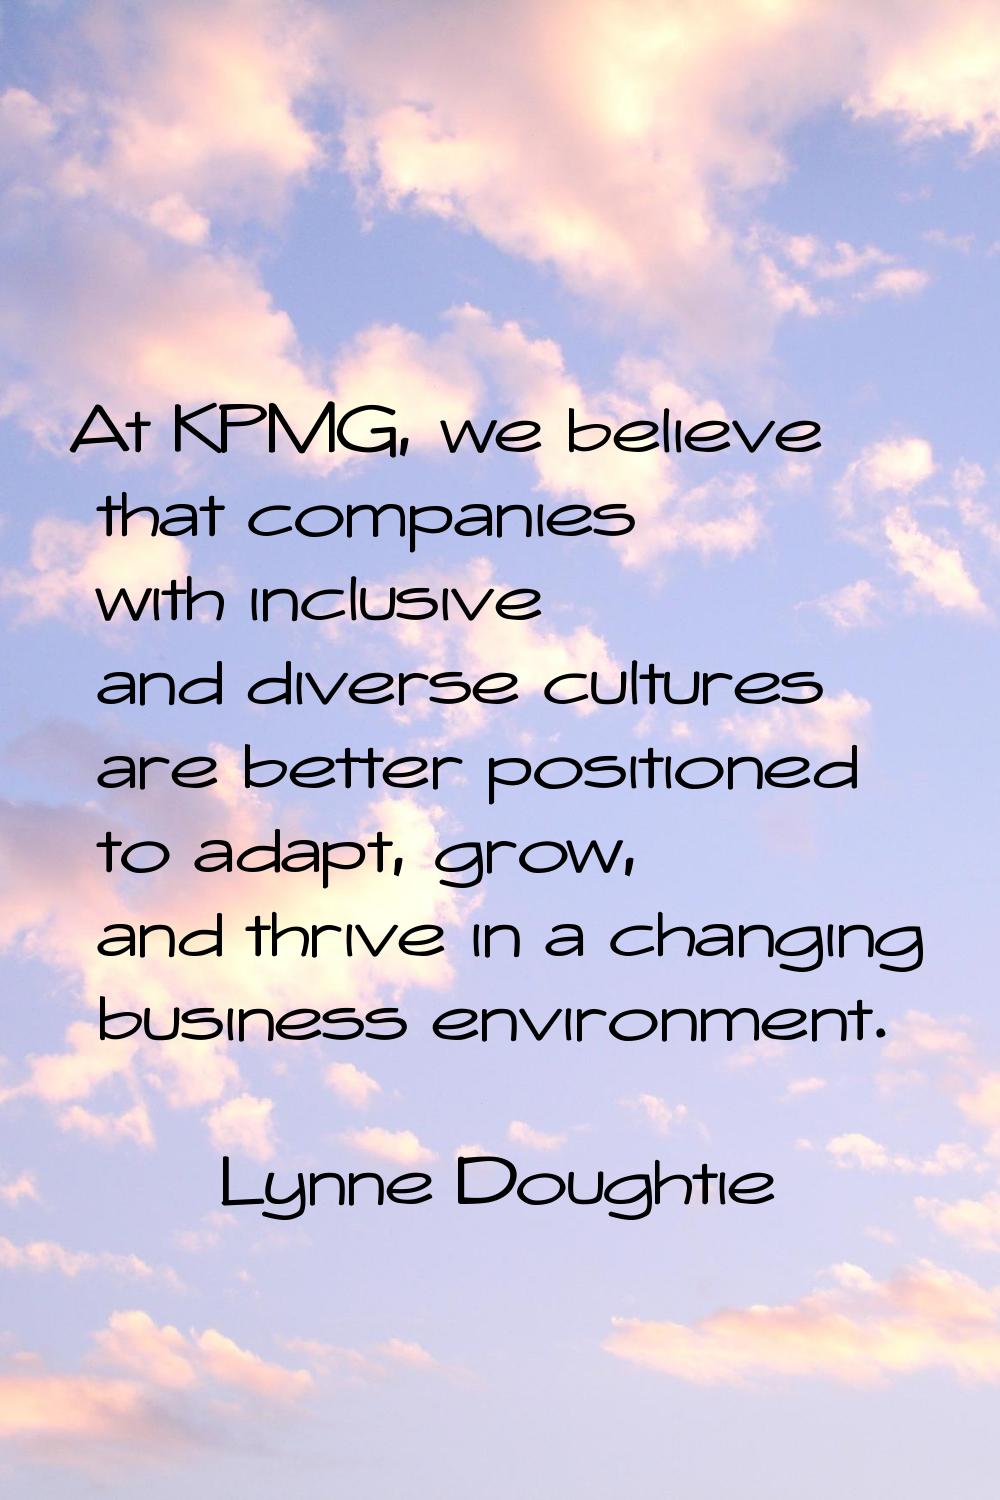 At KPMG, we believe that companies with inclusive and diverse cultures are better positioned to ada